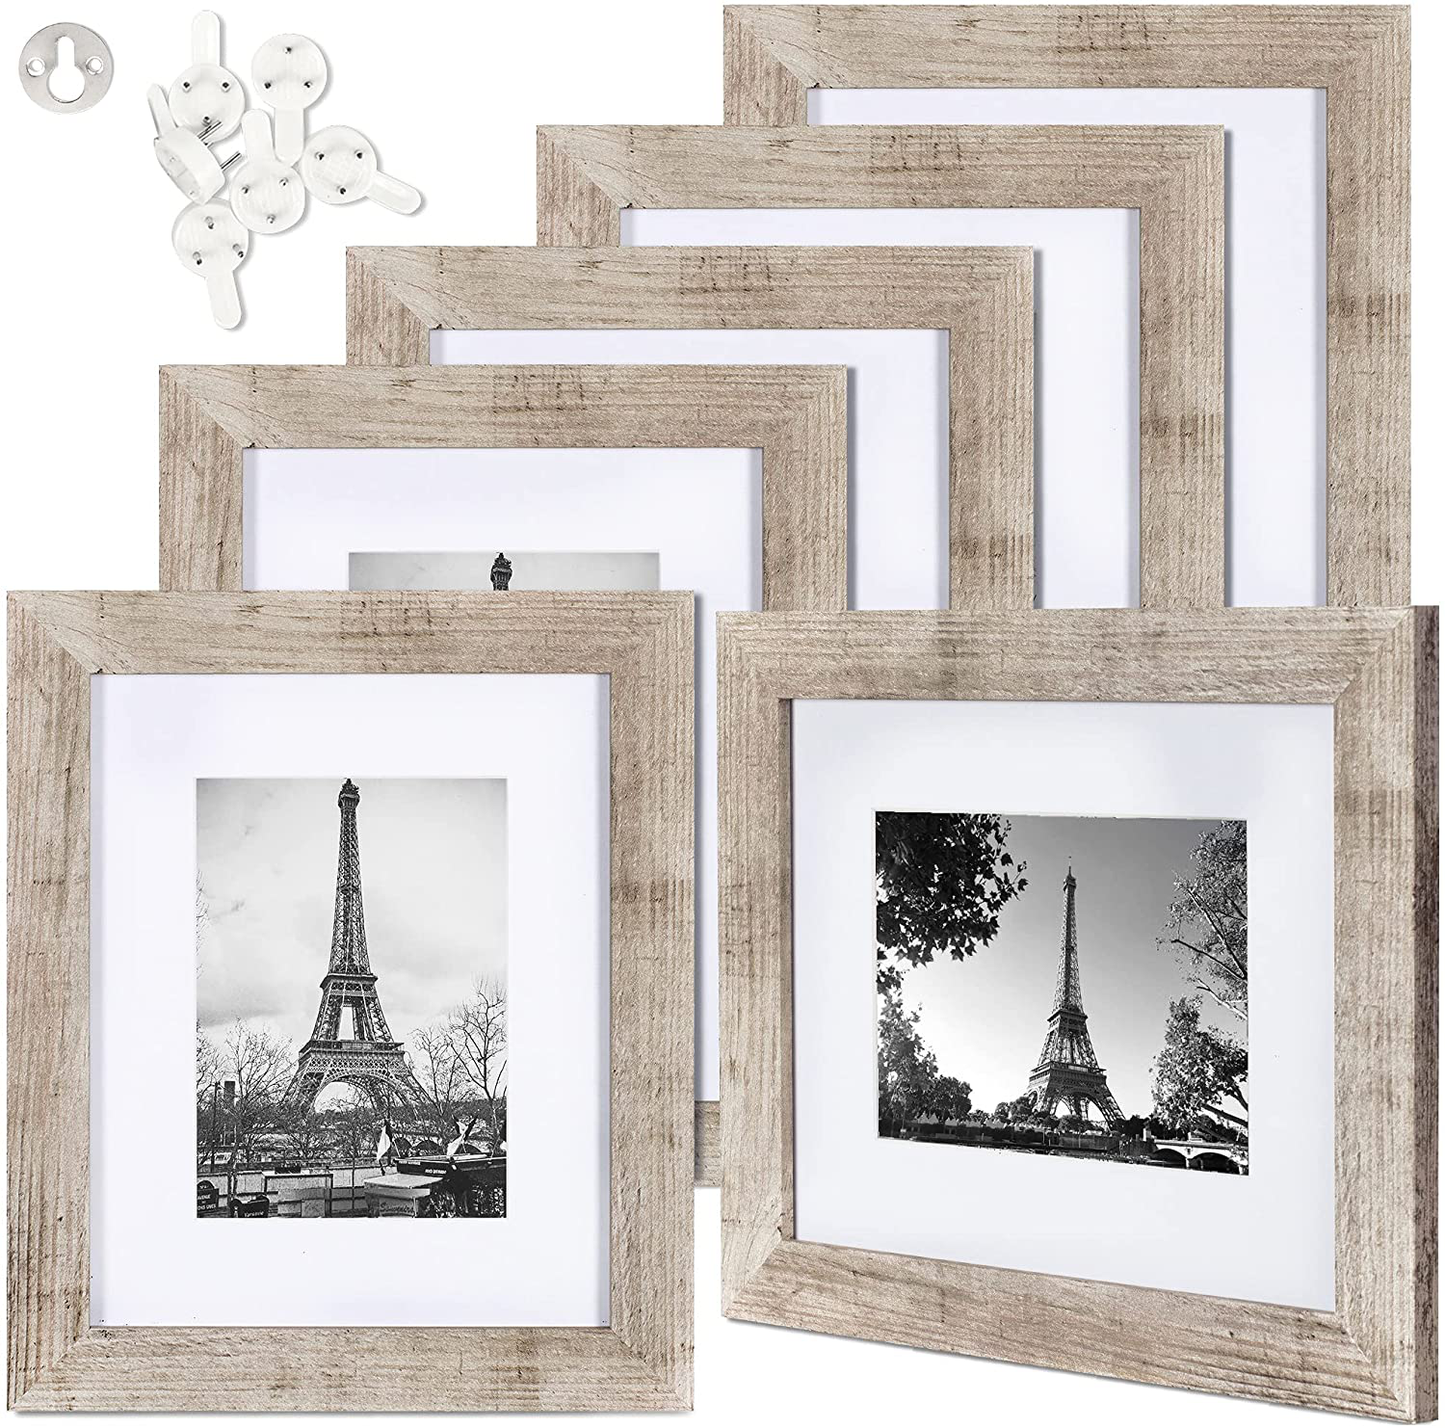 upsimples 8x10 Picture Frame Distressed Burlywood with Real Glass,Display Pictures 5x7 with Mat or 8x10 Without Mat,Multi Photo Frames Collage for Wall or Tabletop Display,Set of 6